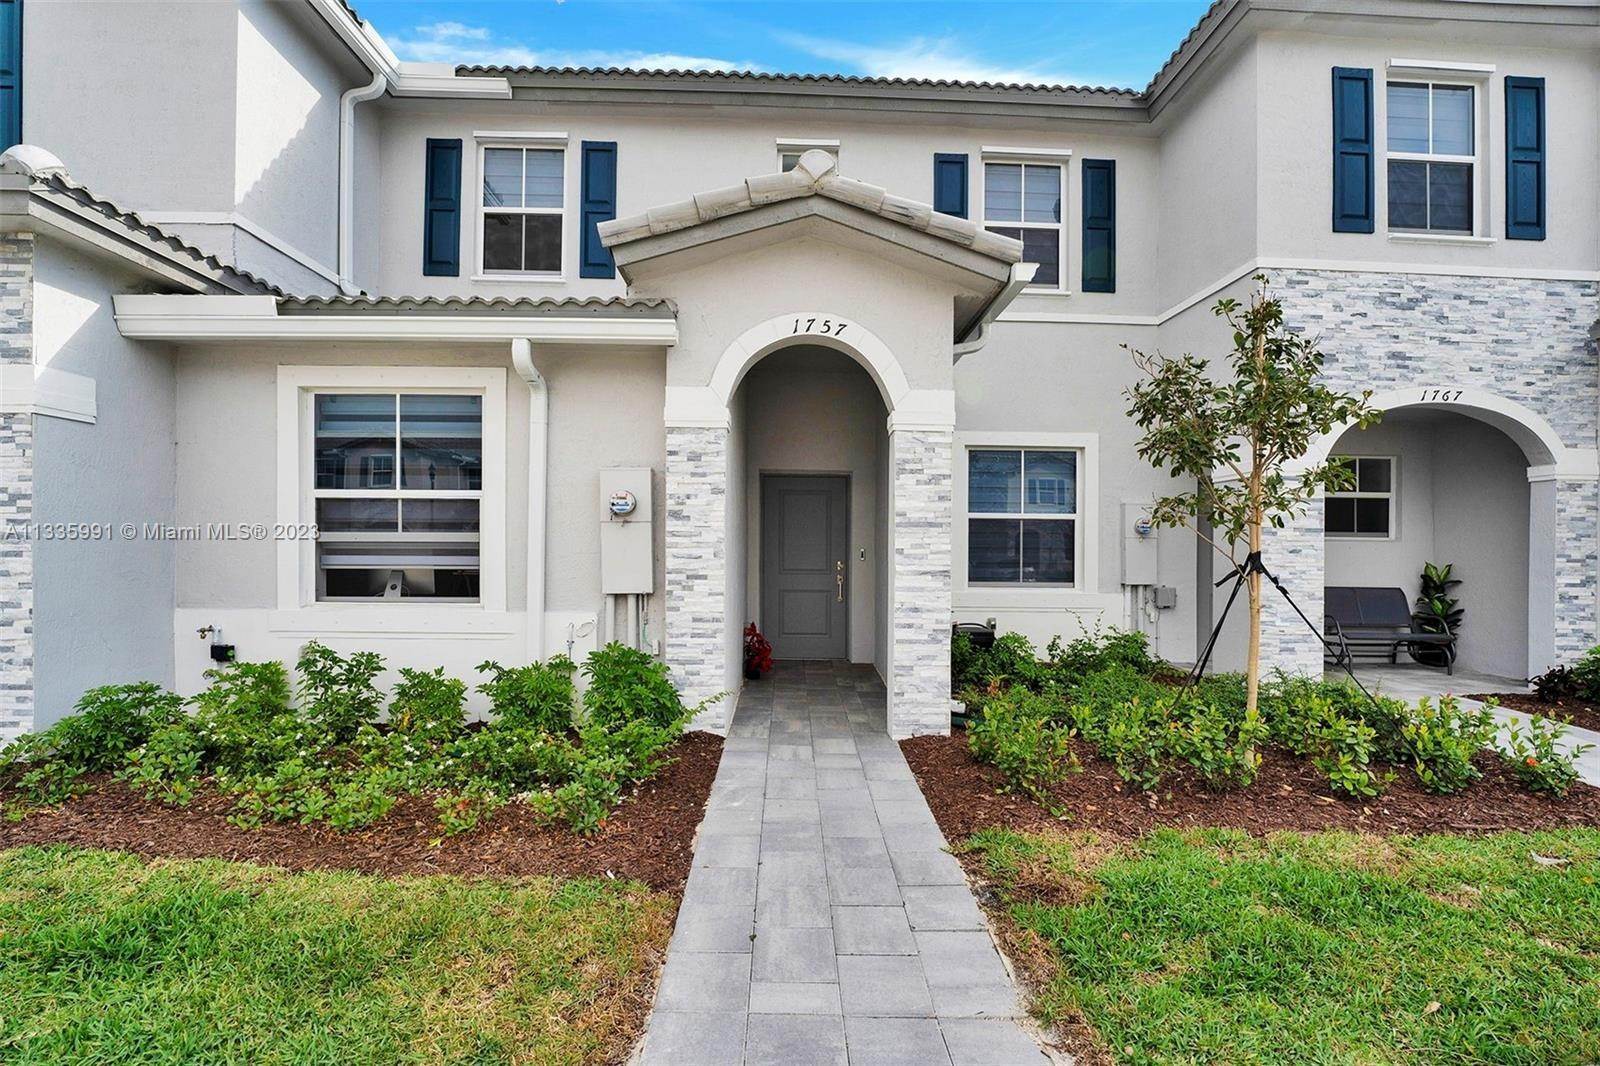 Townhouse at Homestead, FL 33035